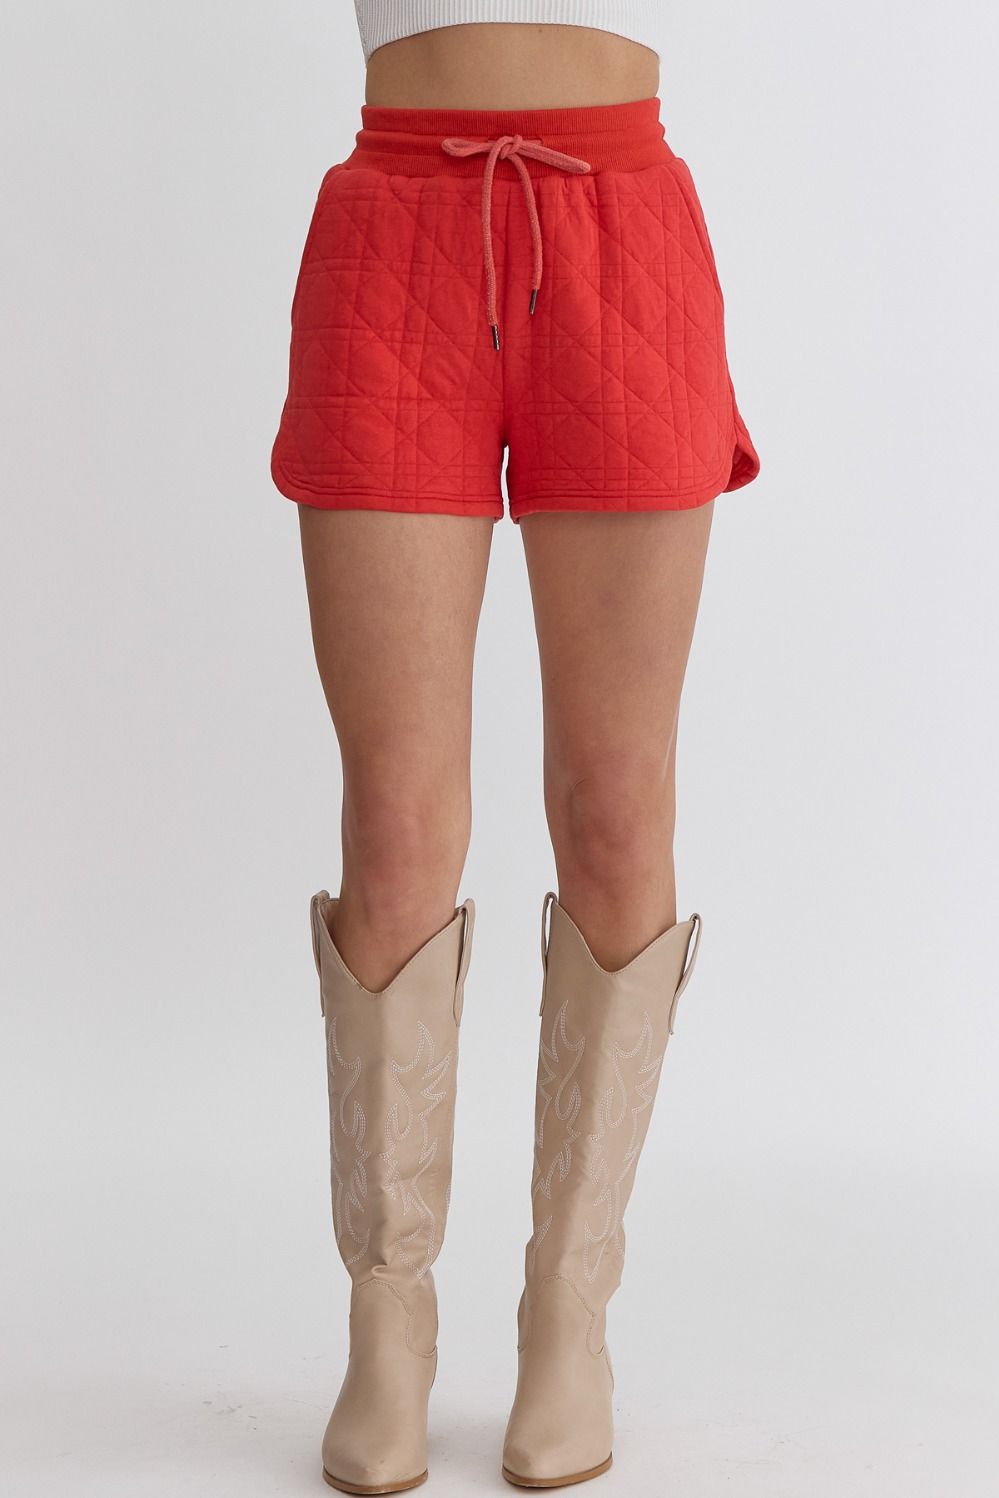 ENTRO INC Women's Shorts RED / S Textured High-Waisted Shorts || David's Clothing P22854